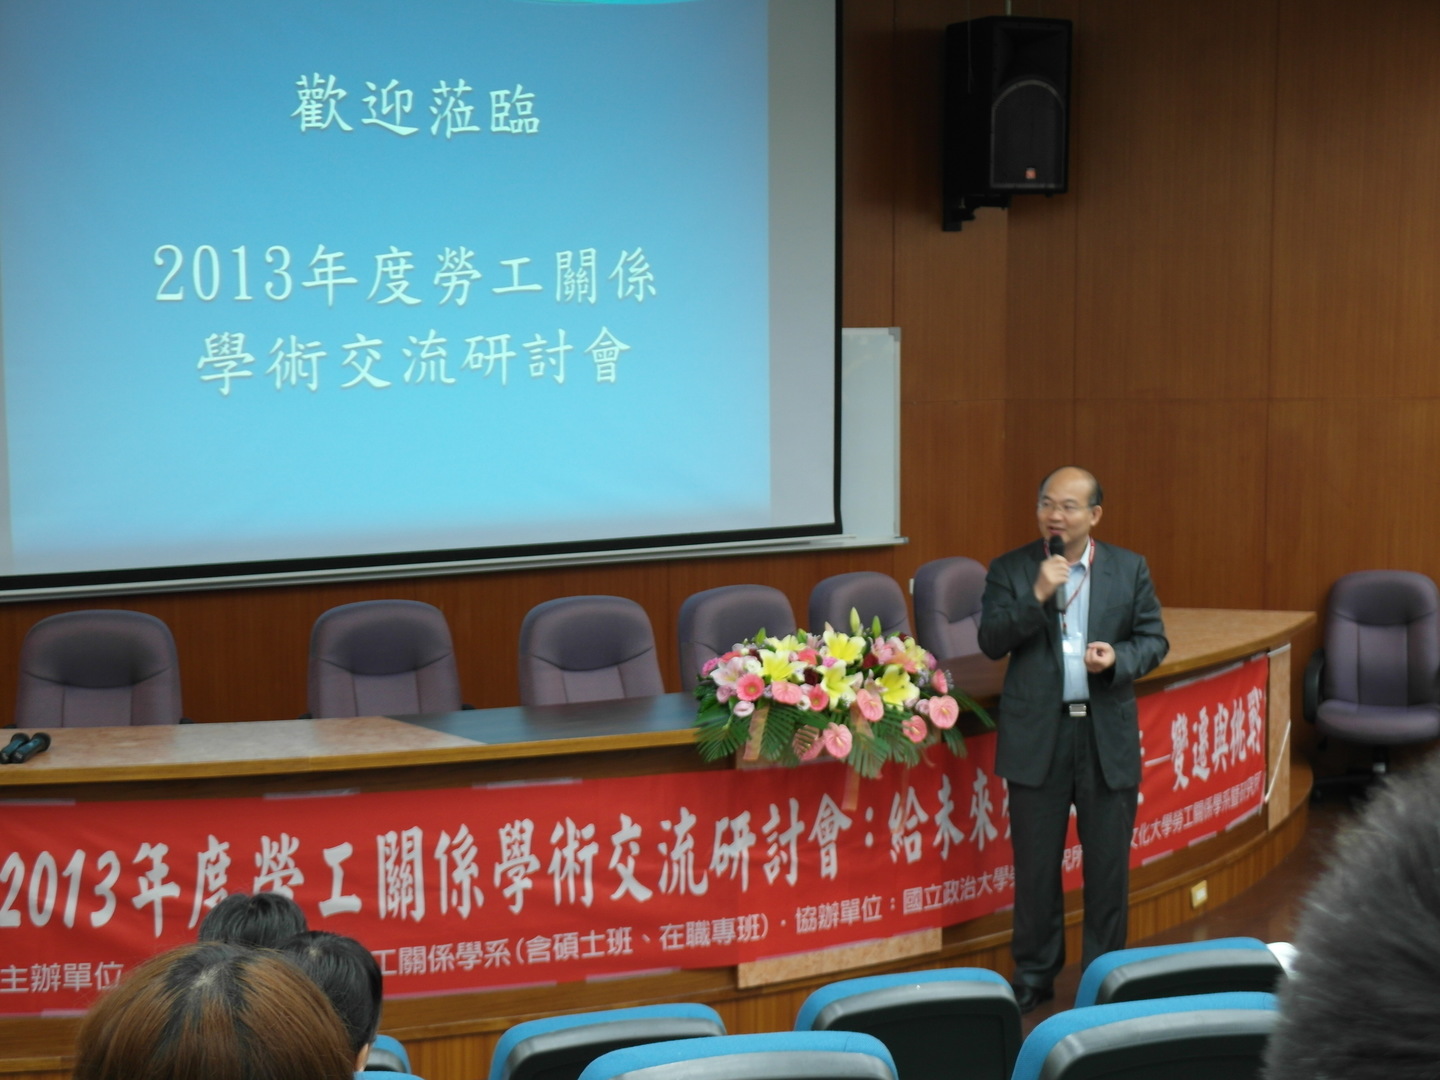 2014 Youth Public Forum: Labor and Social issue (2014.05.03)